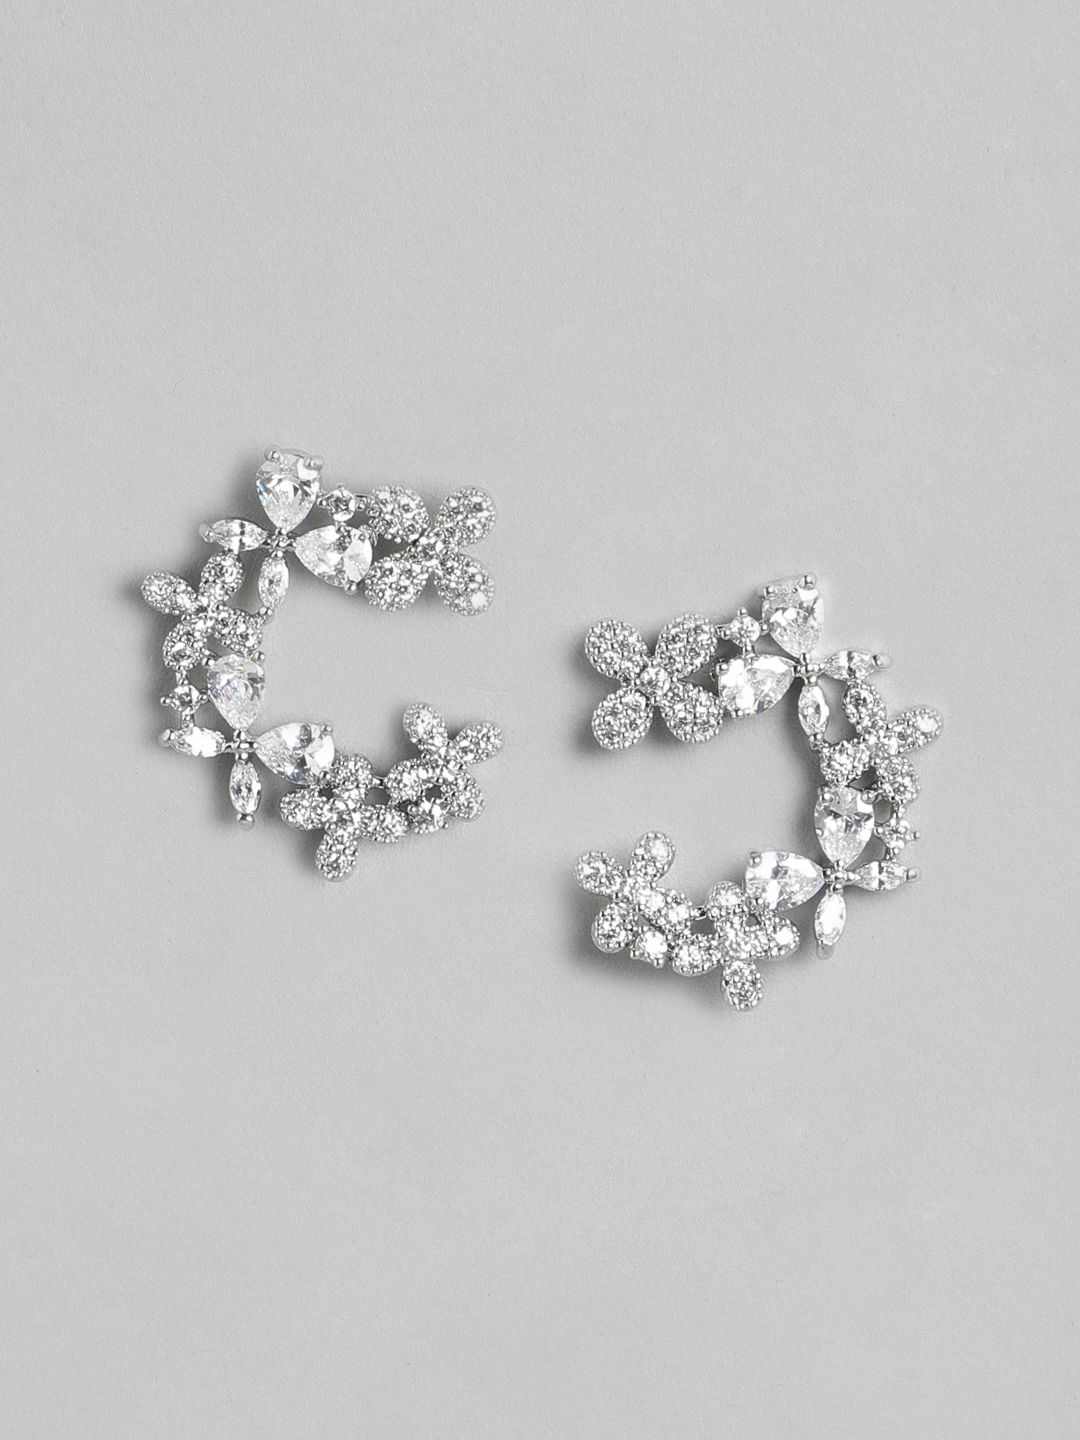 Carlton London Silver-Toned Floral Studs Earrings Price in India